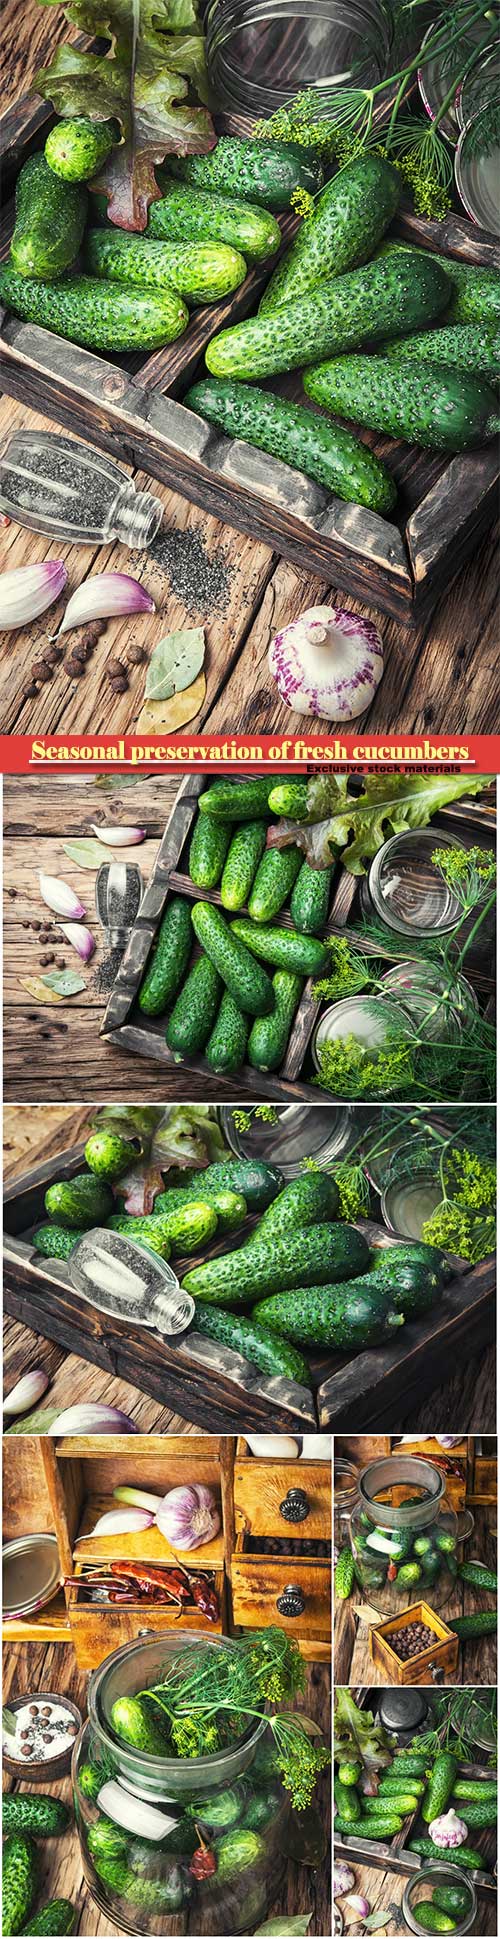 Seasonal preservation of fresh cucumbers for the winter